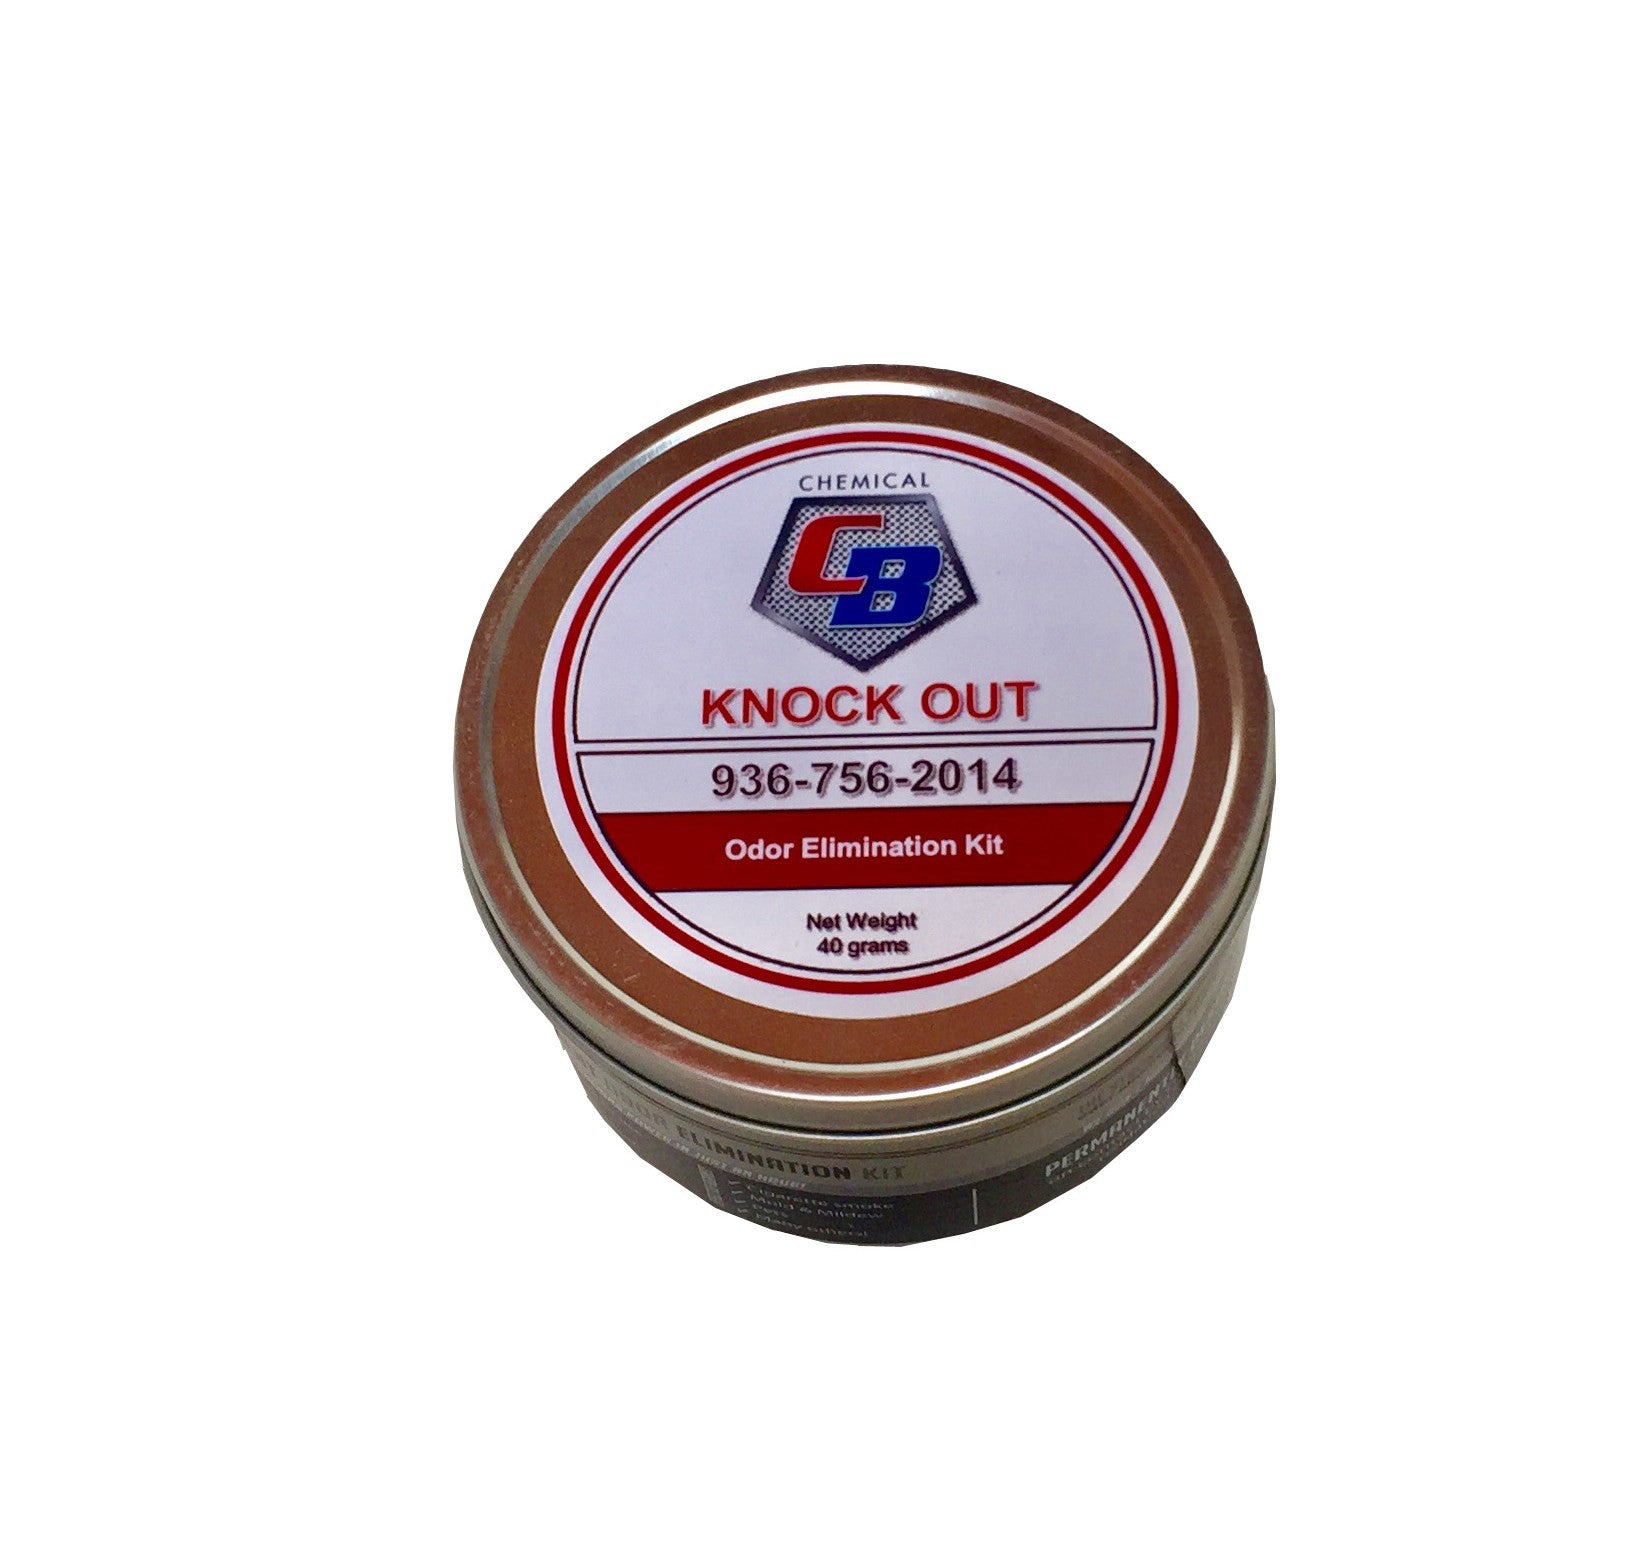 Knock Out - Permanent Odor Elimination Kit - C & B Chemical, Inc